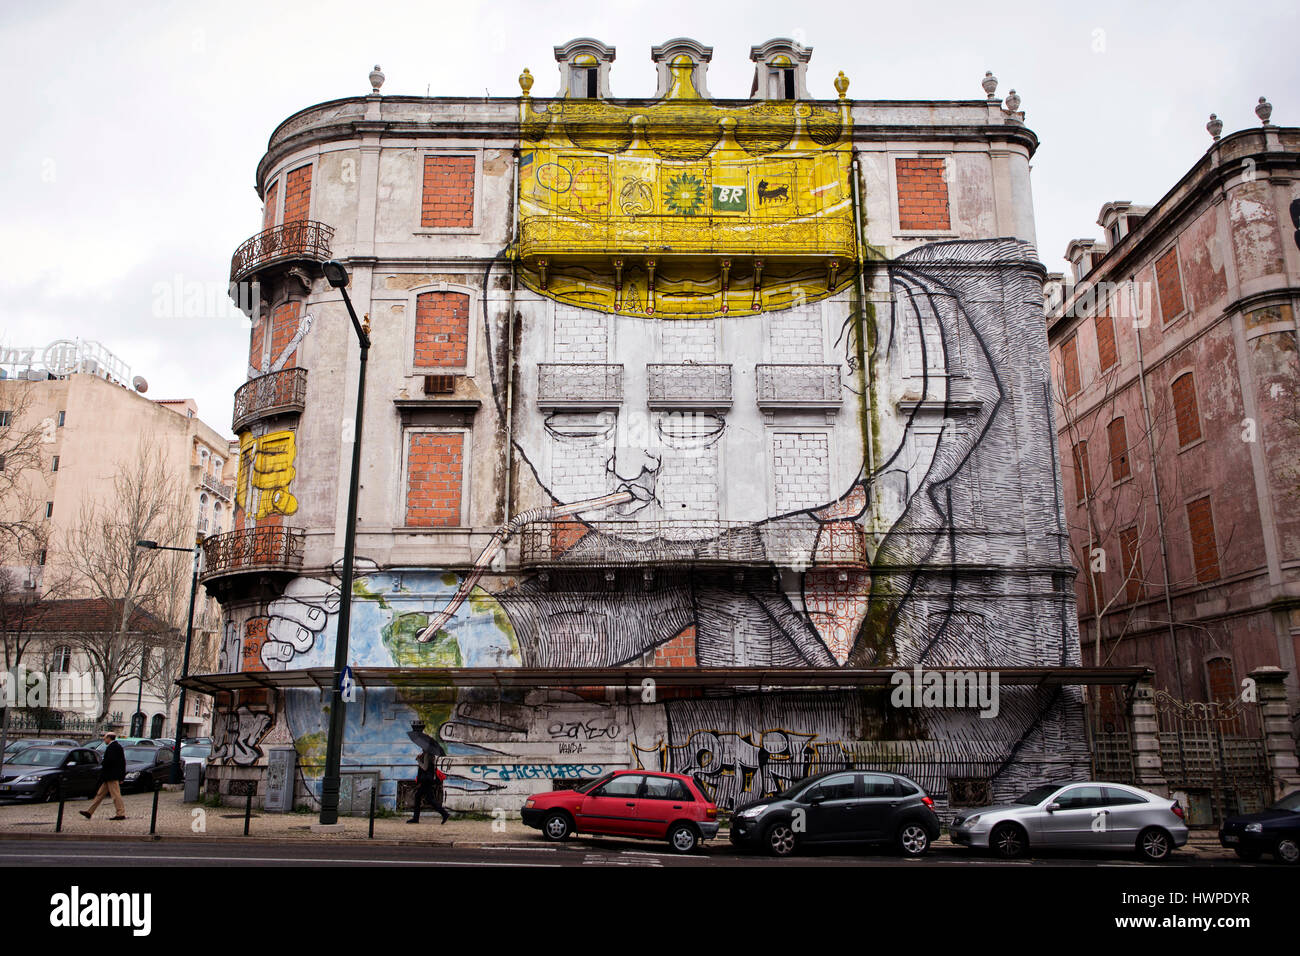 This collaborative piece by the two Urban Street Artists Blu and Os Gémeos in Lisbon, Portugal. Stock Photo